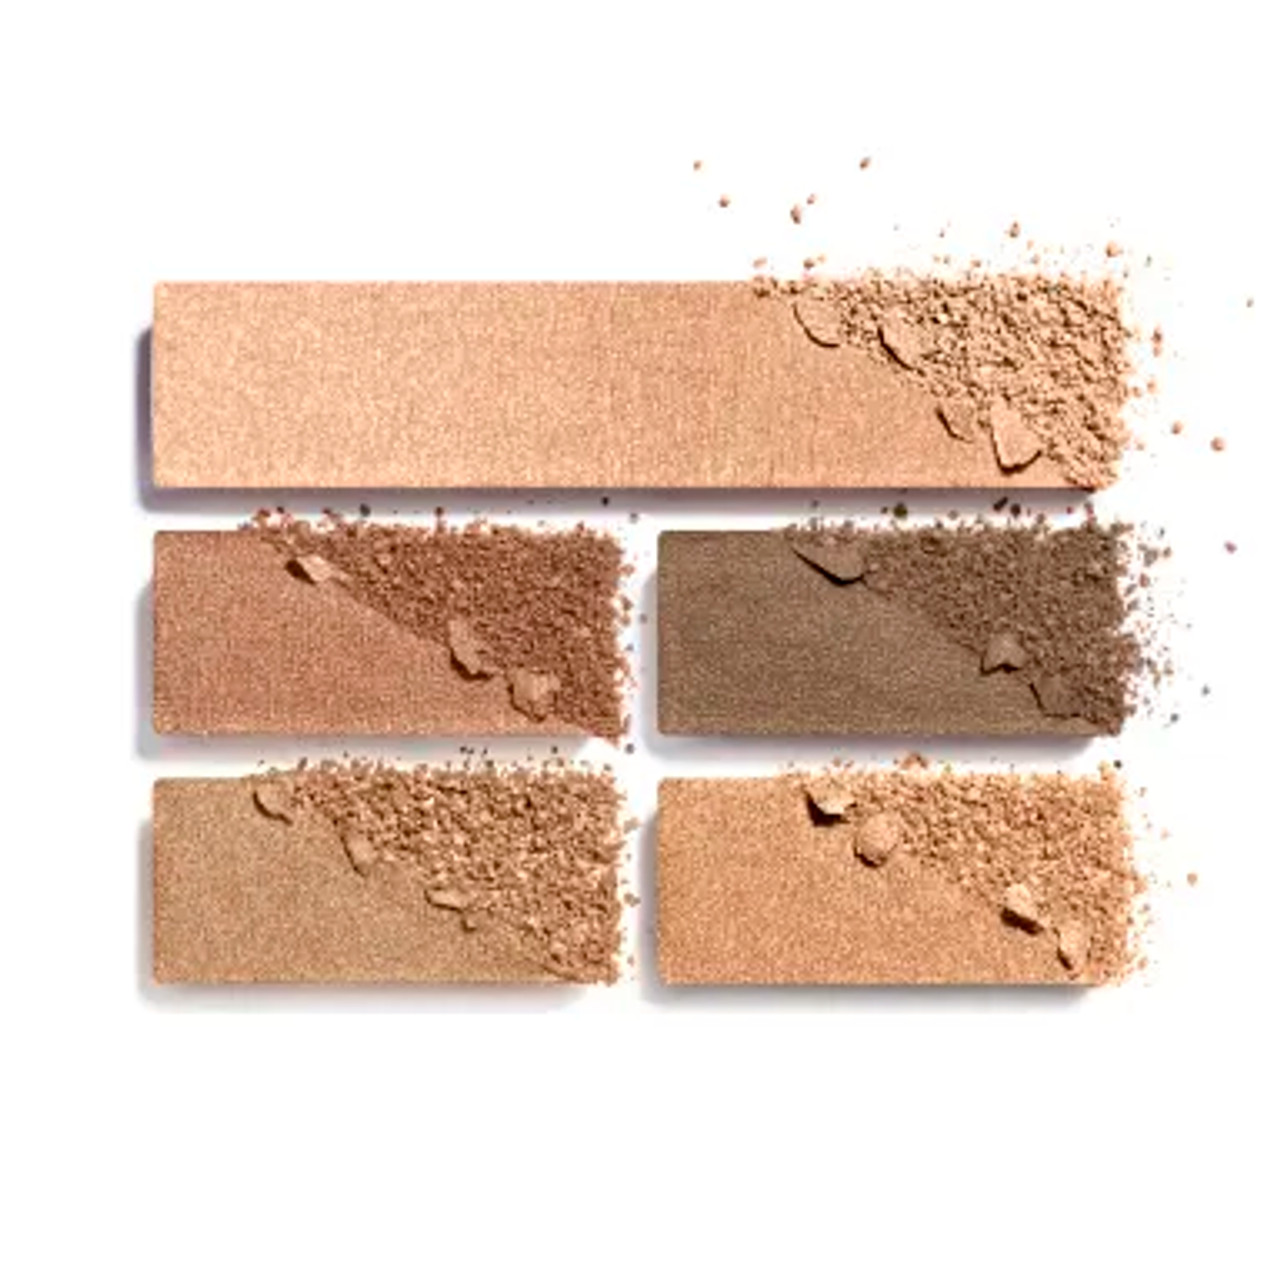 Chanel Les Beiges Healthy Glow Natural Eyeshadow Palette - Intense